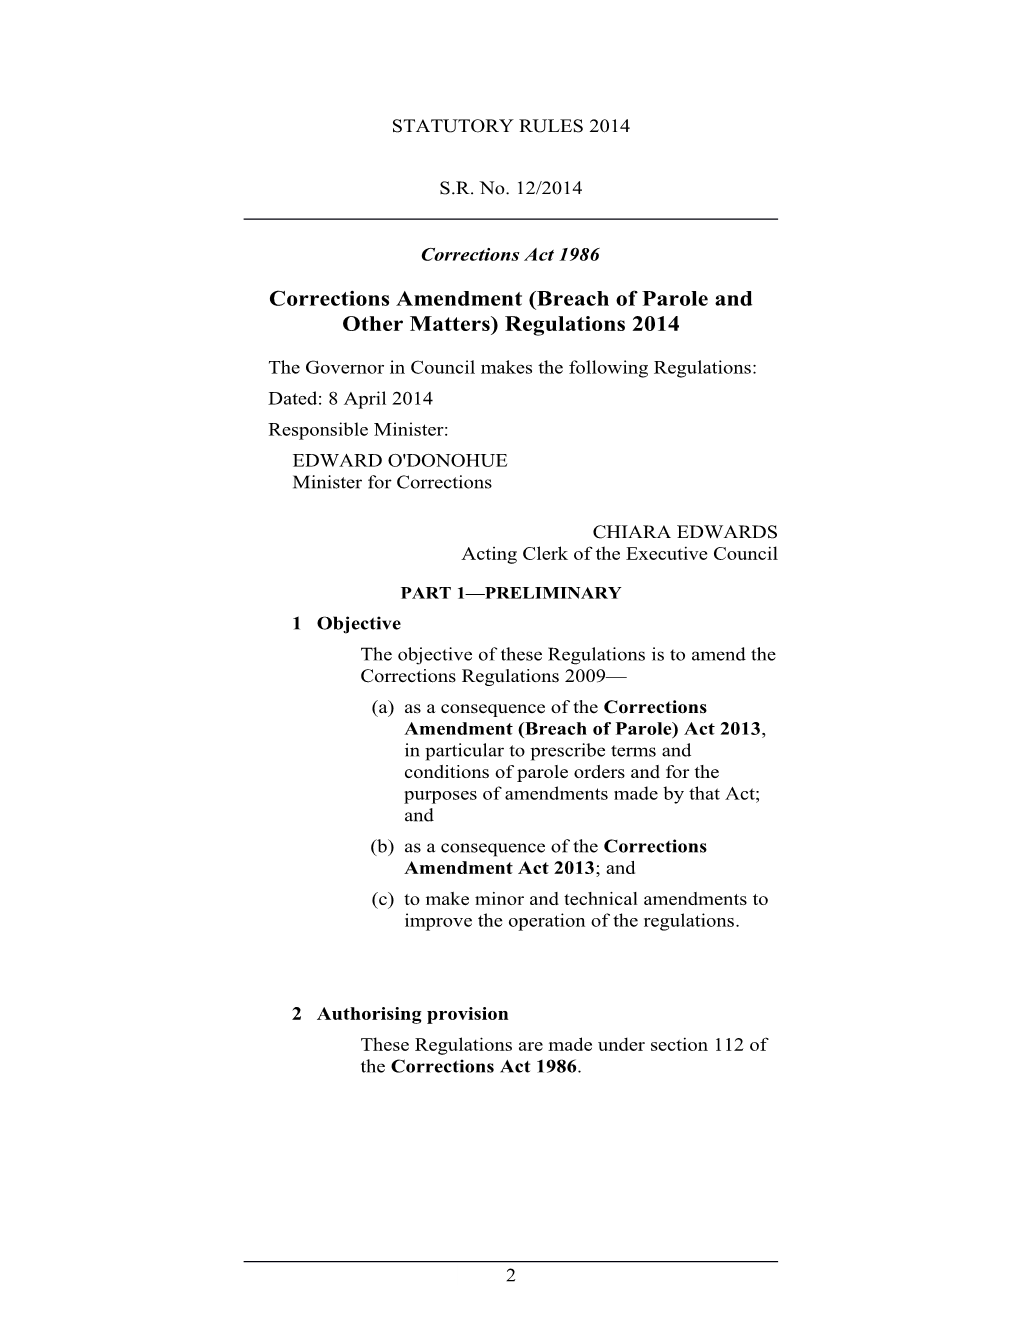 Corrections Amendment (Breach of Parole and Other Matters) Regulations 2014